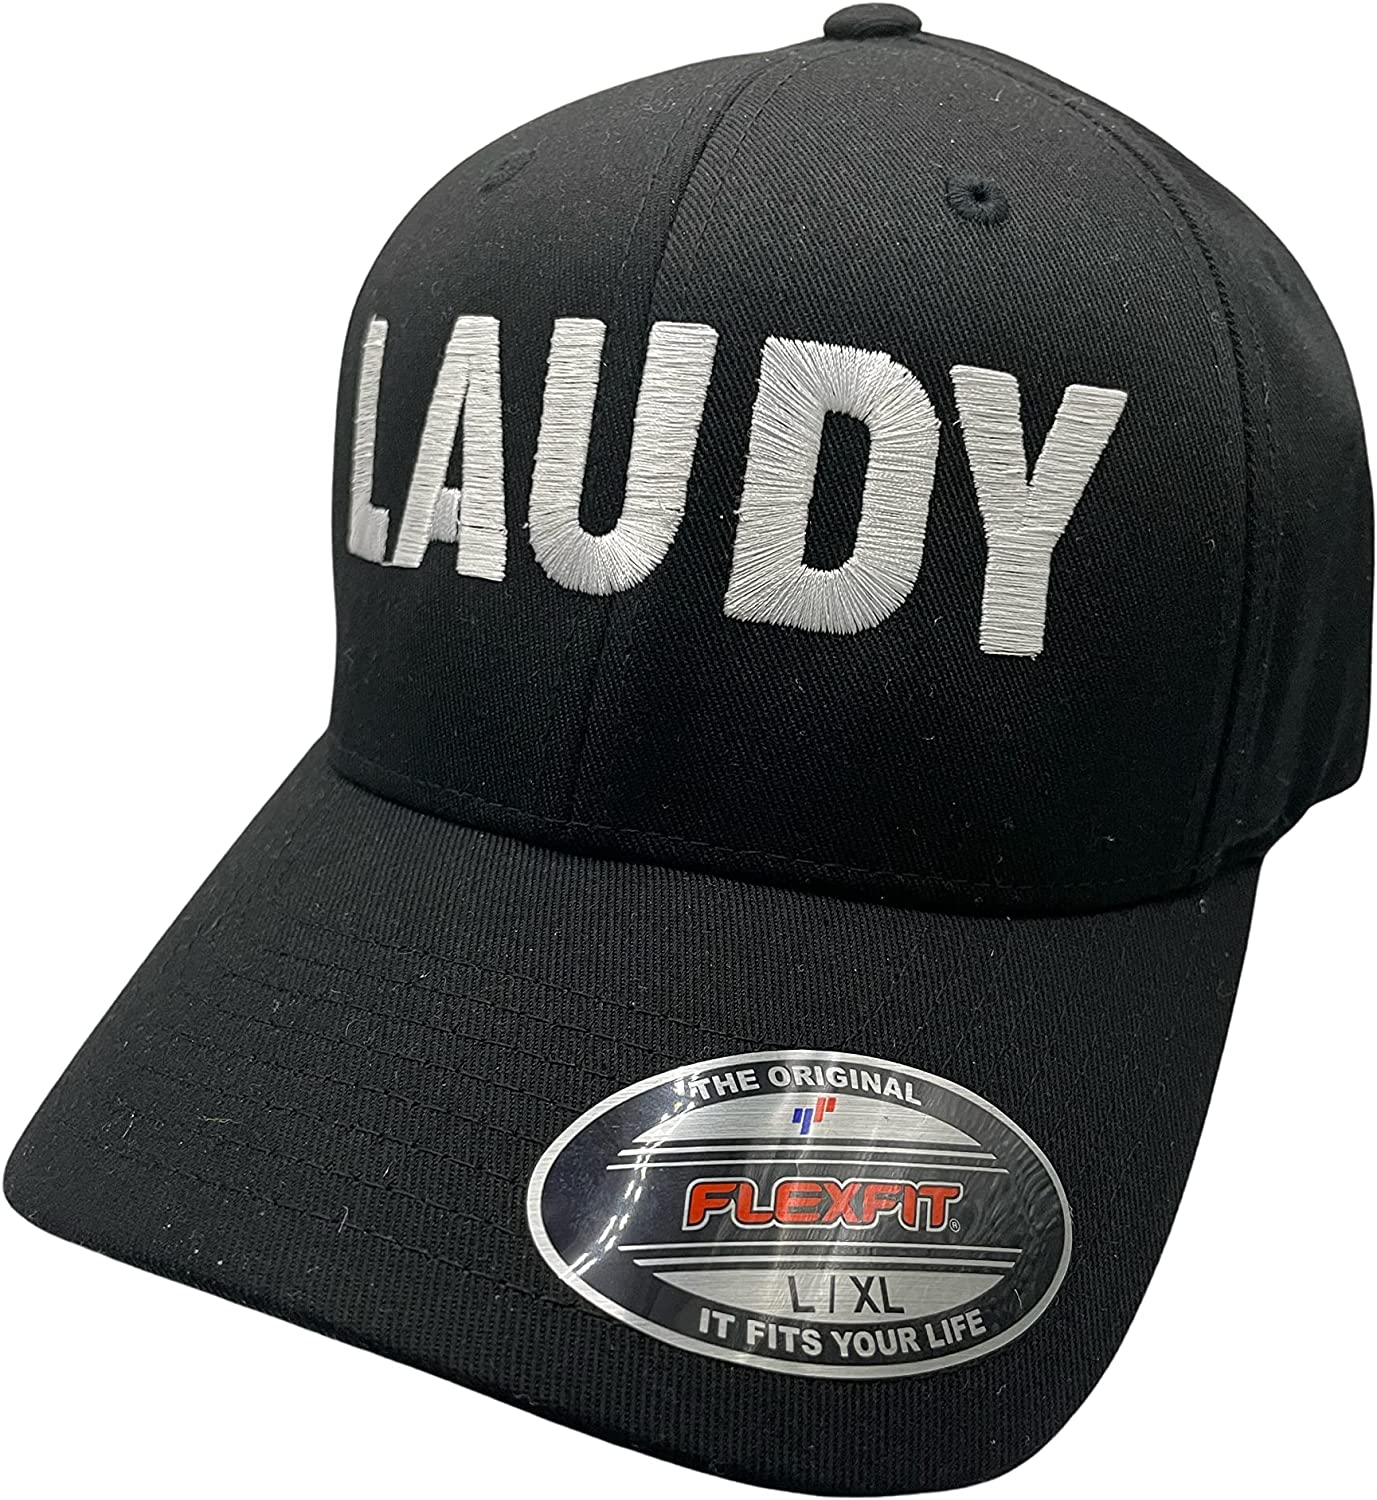 LAUDY – Black, Flex Fit, Fitted Hat by Pats Hats